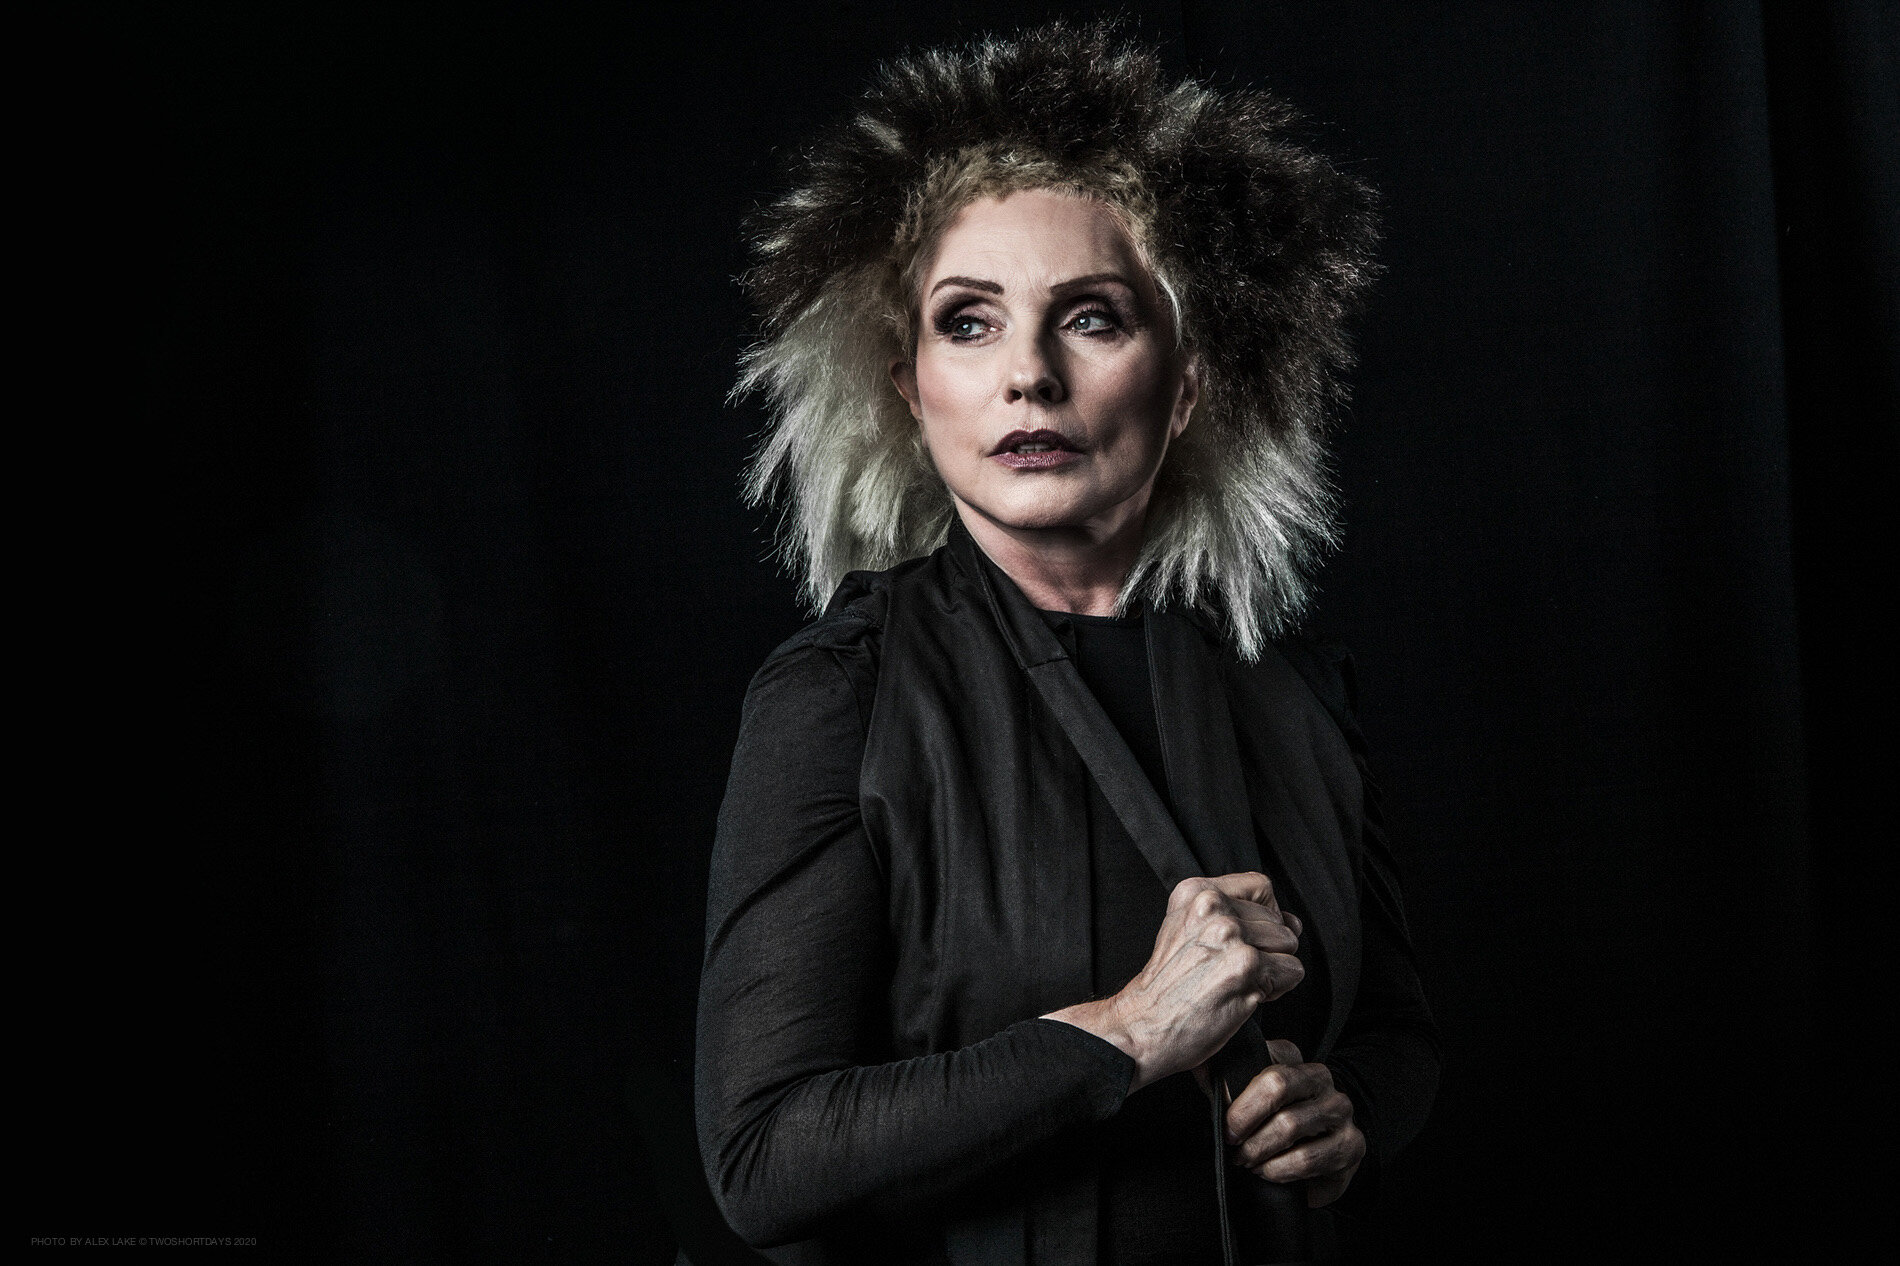 debbie_harry_photography_copyright_ALEX_LAKE_do_not_reproduce_without_permission_TWOSHORTDAYS.jpg